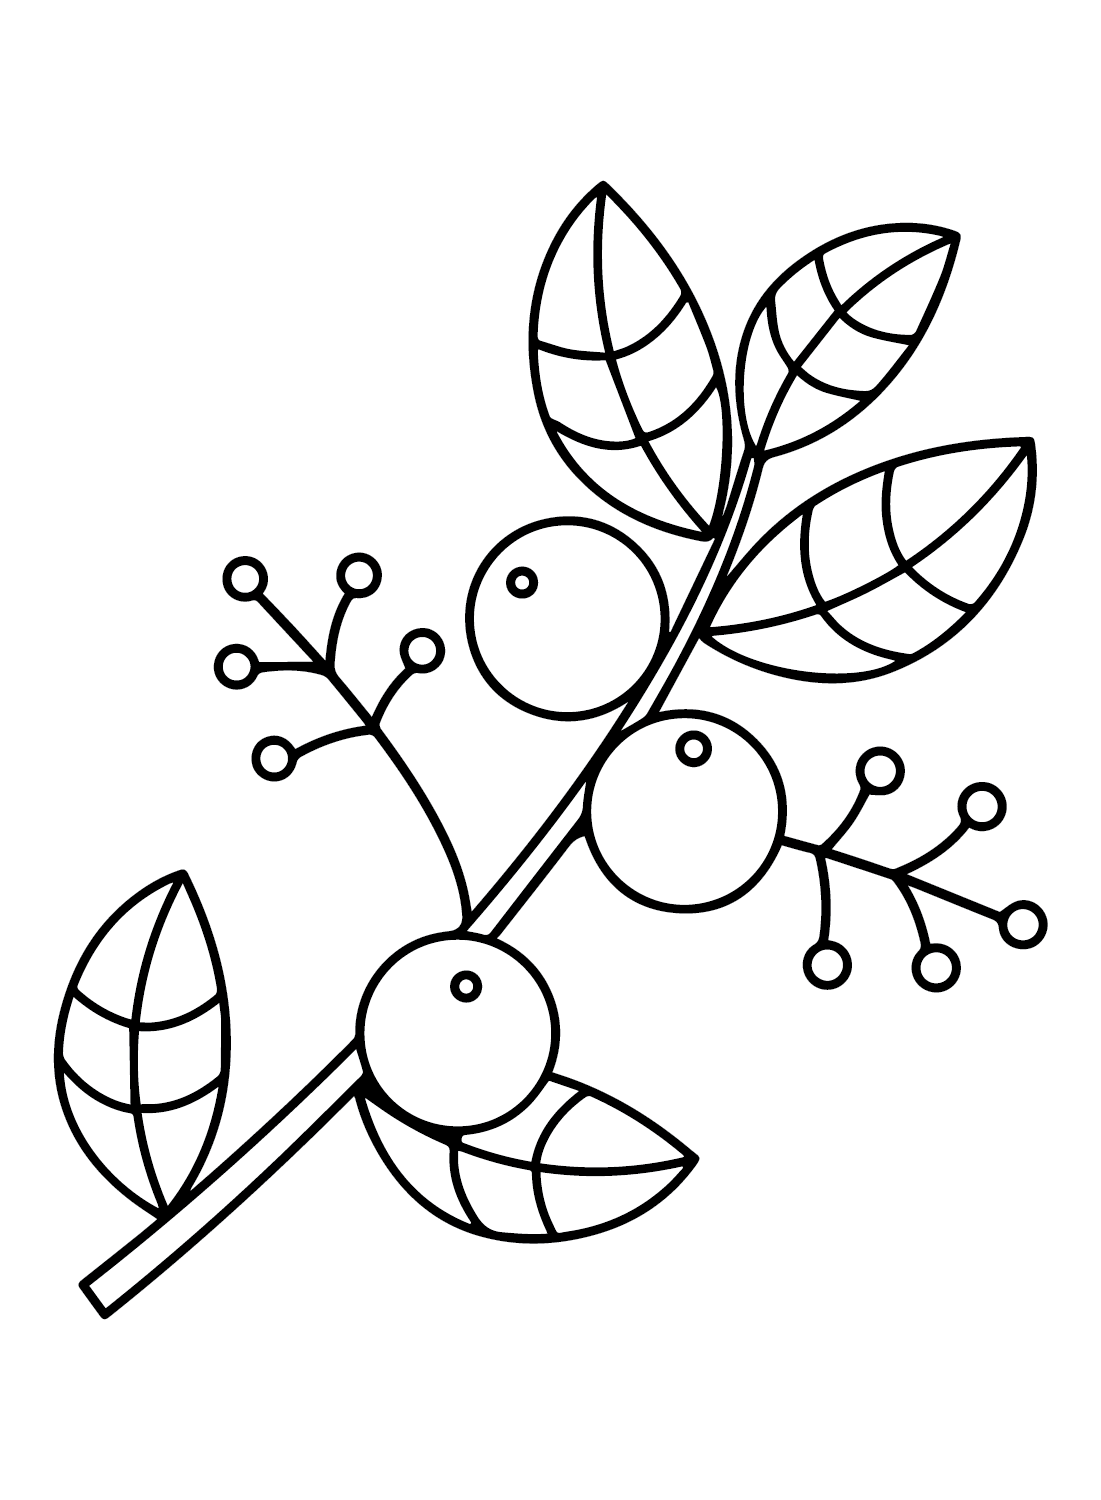 Free Printable Huckleberry from Huckleberry